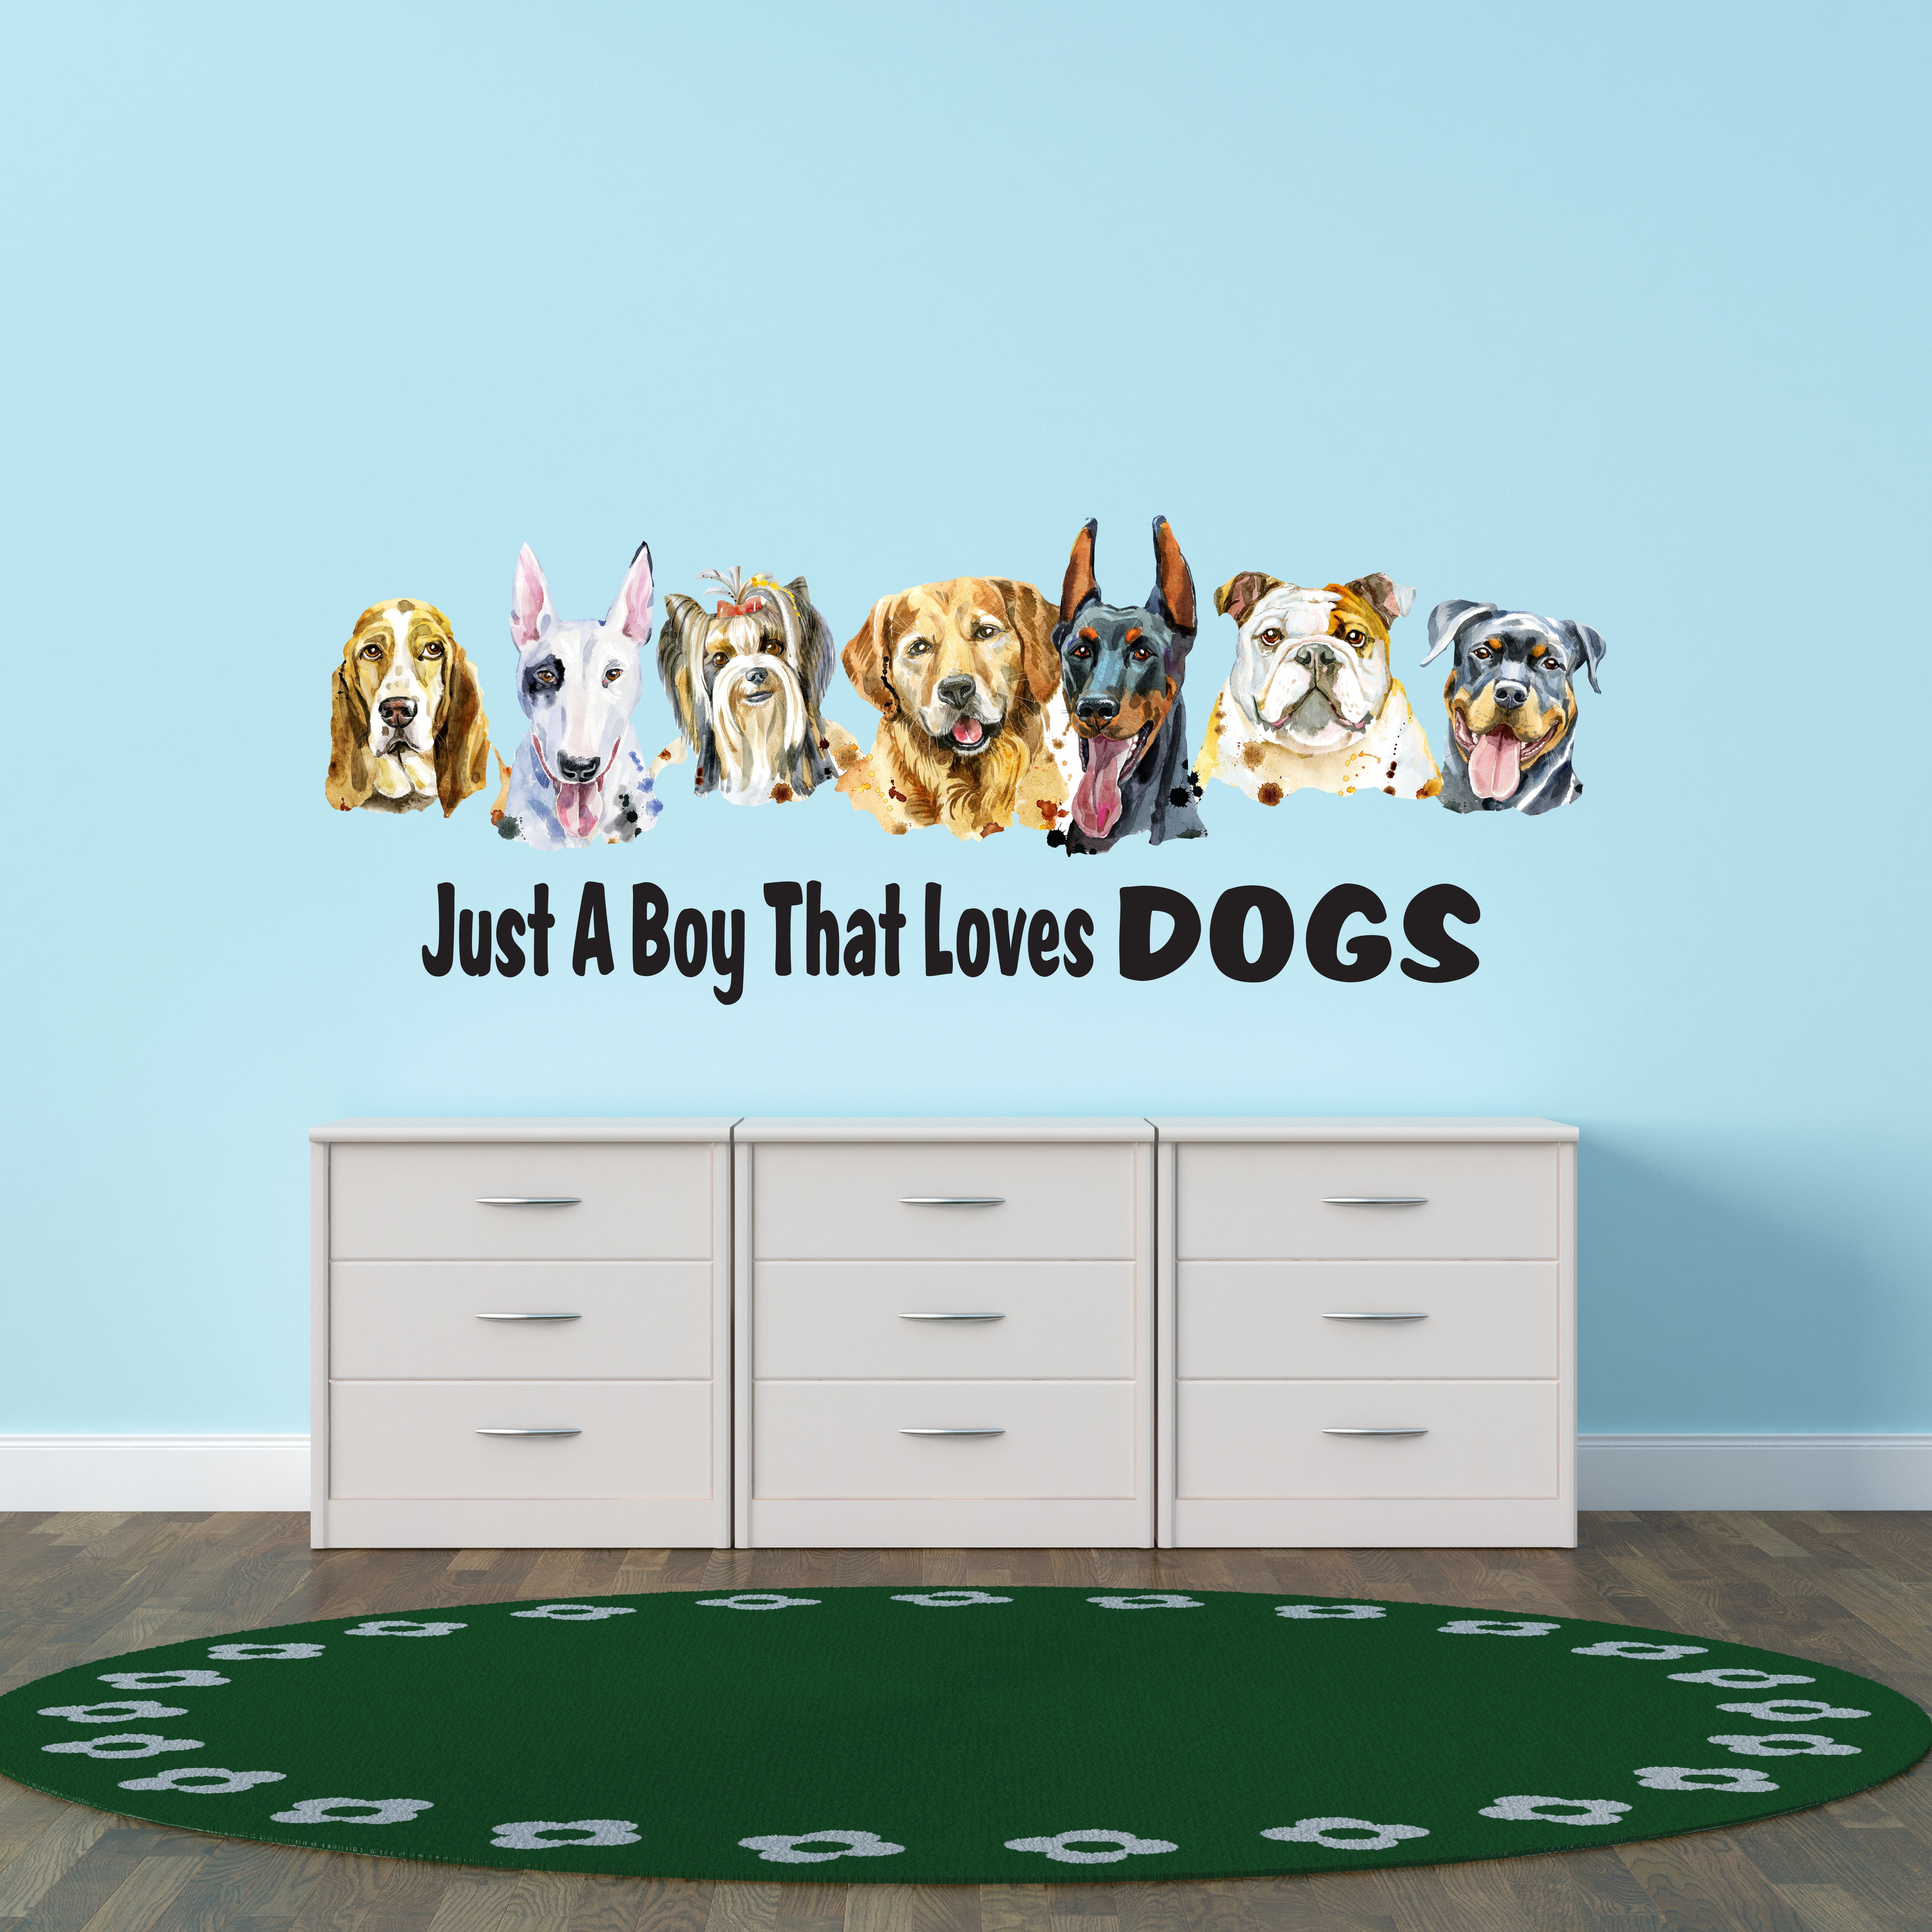 Vinyl Wall Decal Pets Friendship Animals Dogs Best Friends Quote Stick —  Wallstickers4you